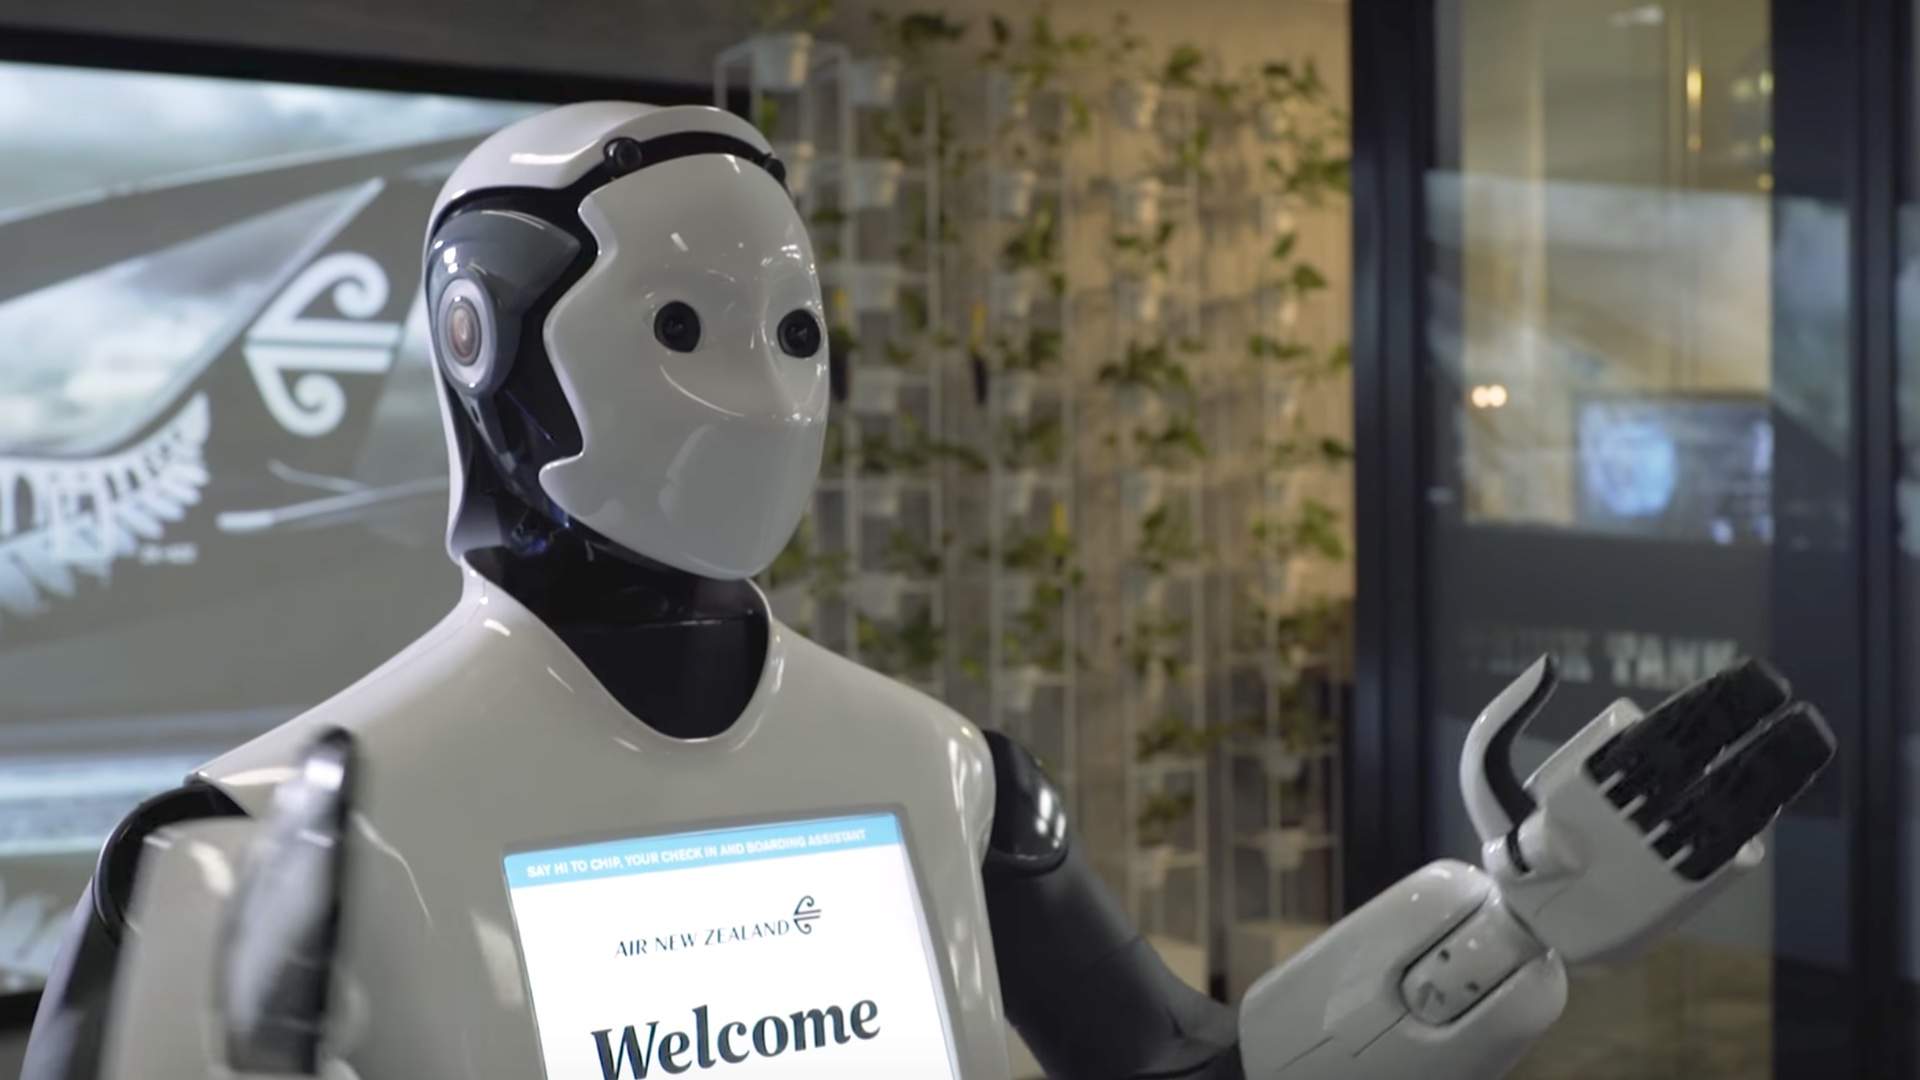 Robot Staff Are Being Trialled at Sydney Airport This Week